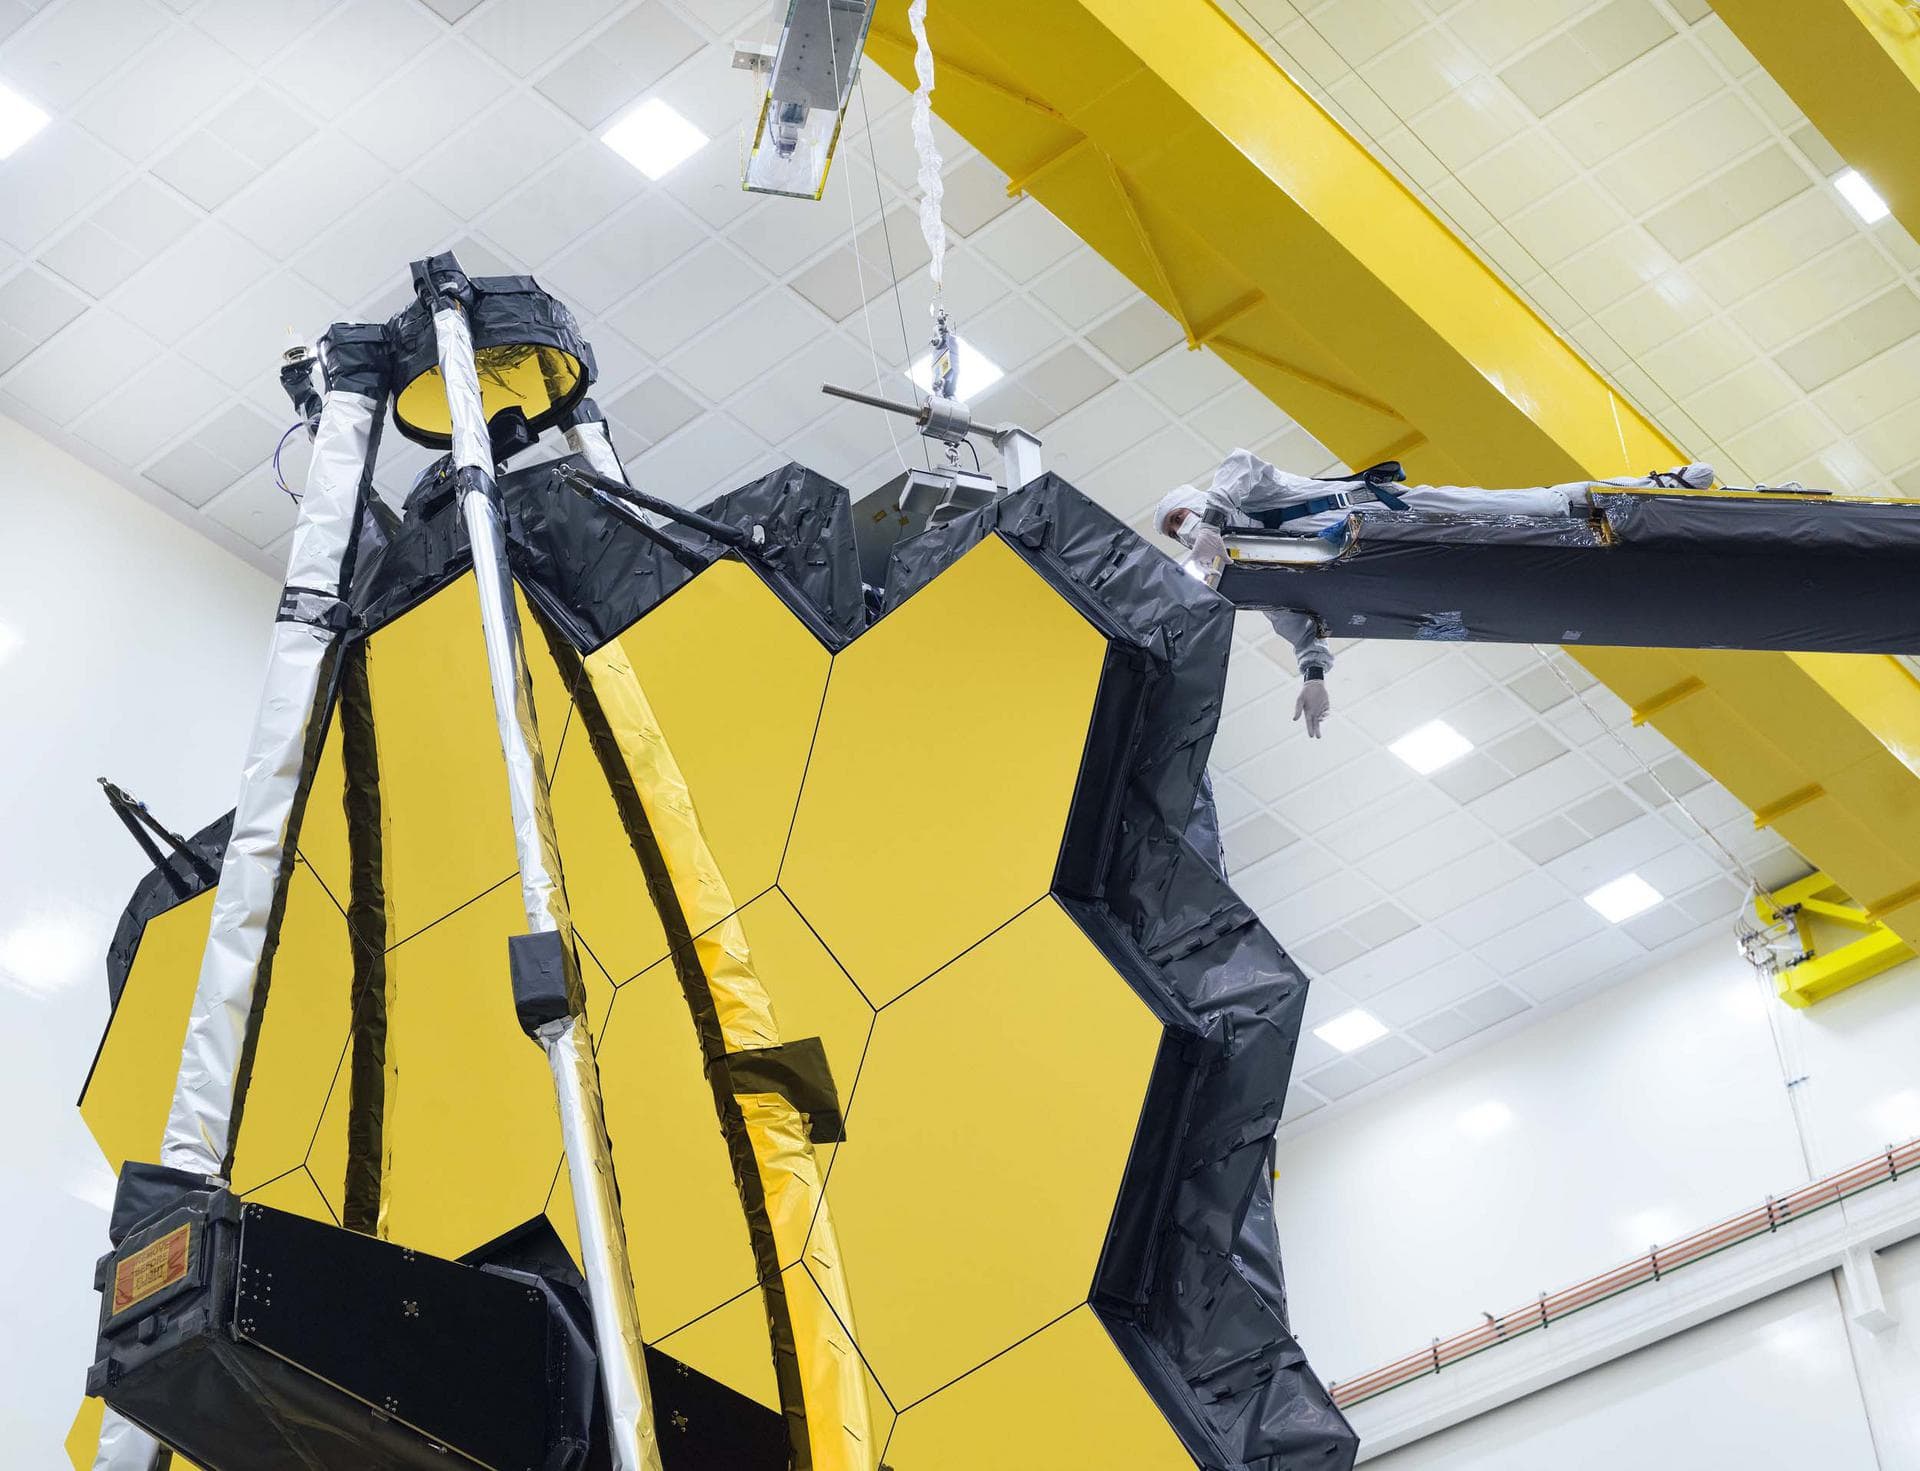 James Webb Telescope (James Webb Space Telescope) has become one step closer to space. Experts NASA and the company Northrop Grumman has successfully completed the final test to open the main mirror of the device, during which it was transferred to the working position. The next time the mirror JWST will be deployed in orbit.